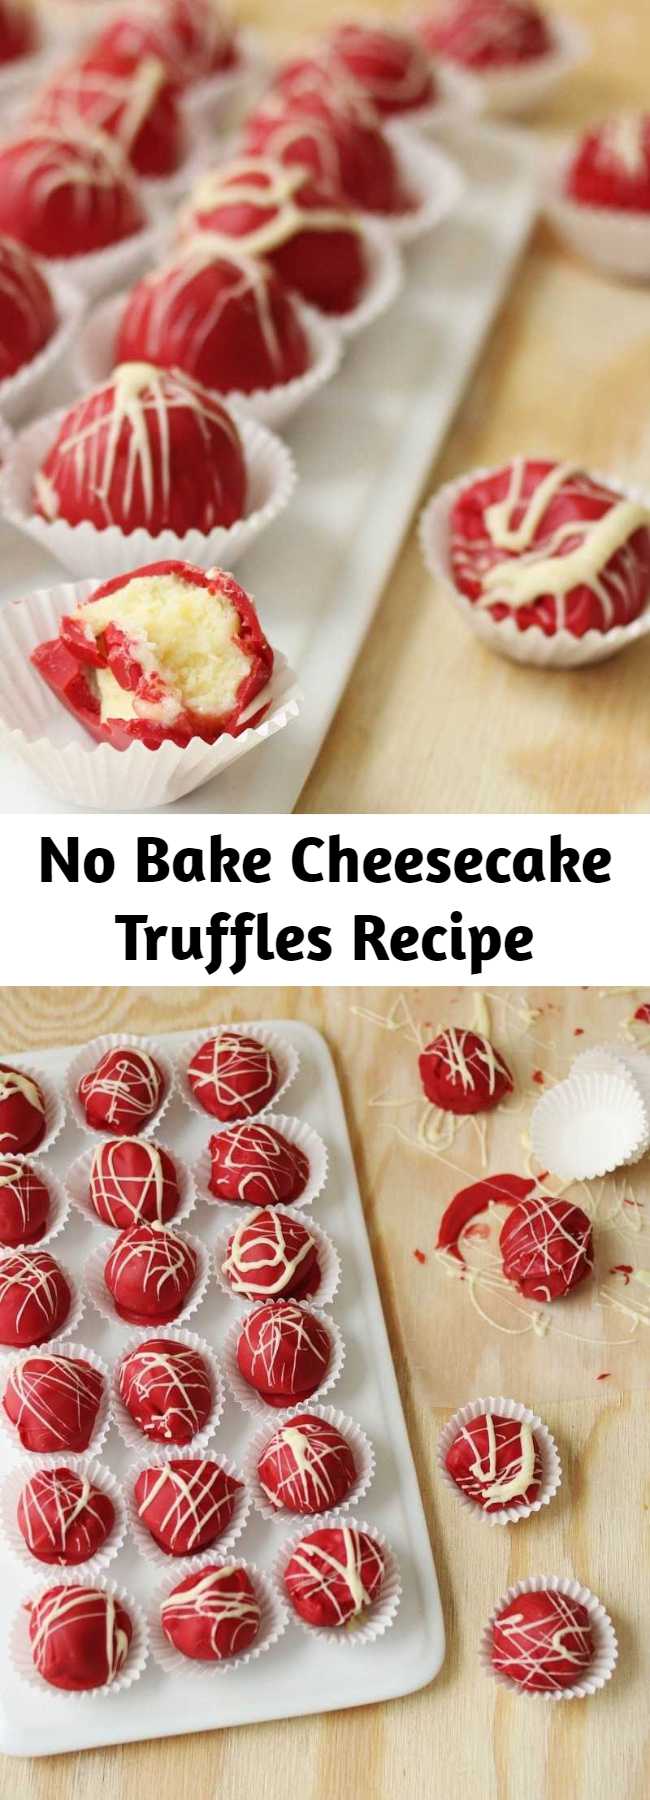 No Bake Cheesecake Truffles Recipe - These cheesecake truffles are a little bit magic. There’s no baking involved. Actually, there’s really no “cooking” to speak of. This isn’t really even a recipe, more assembly instructions. And the lesson I draw from this is that sometimes magic = convenience.